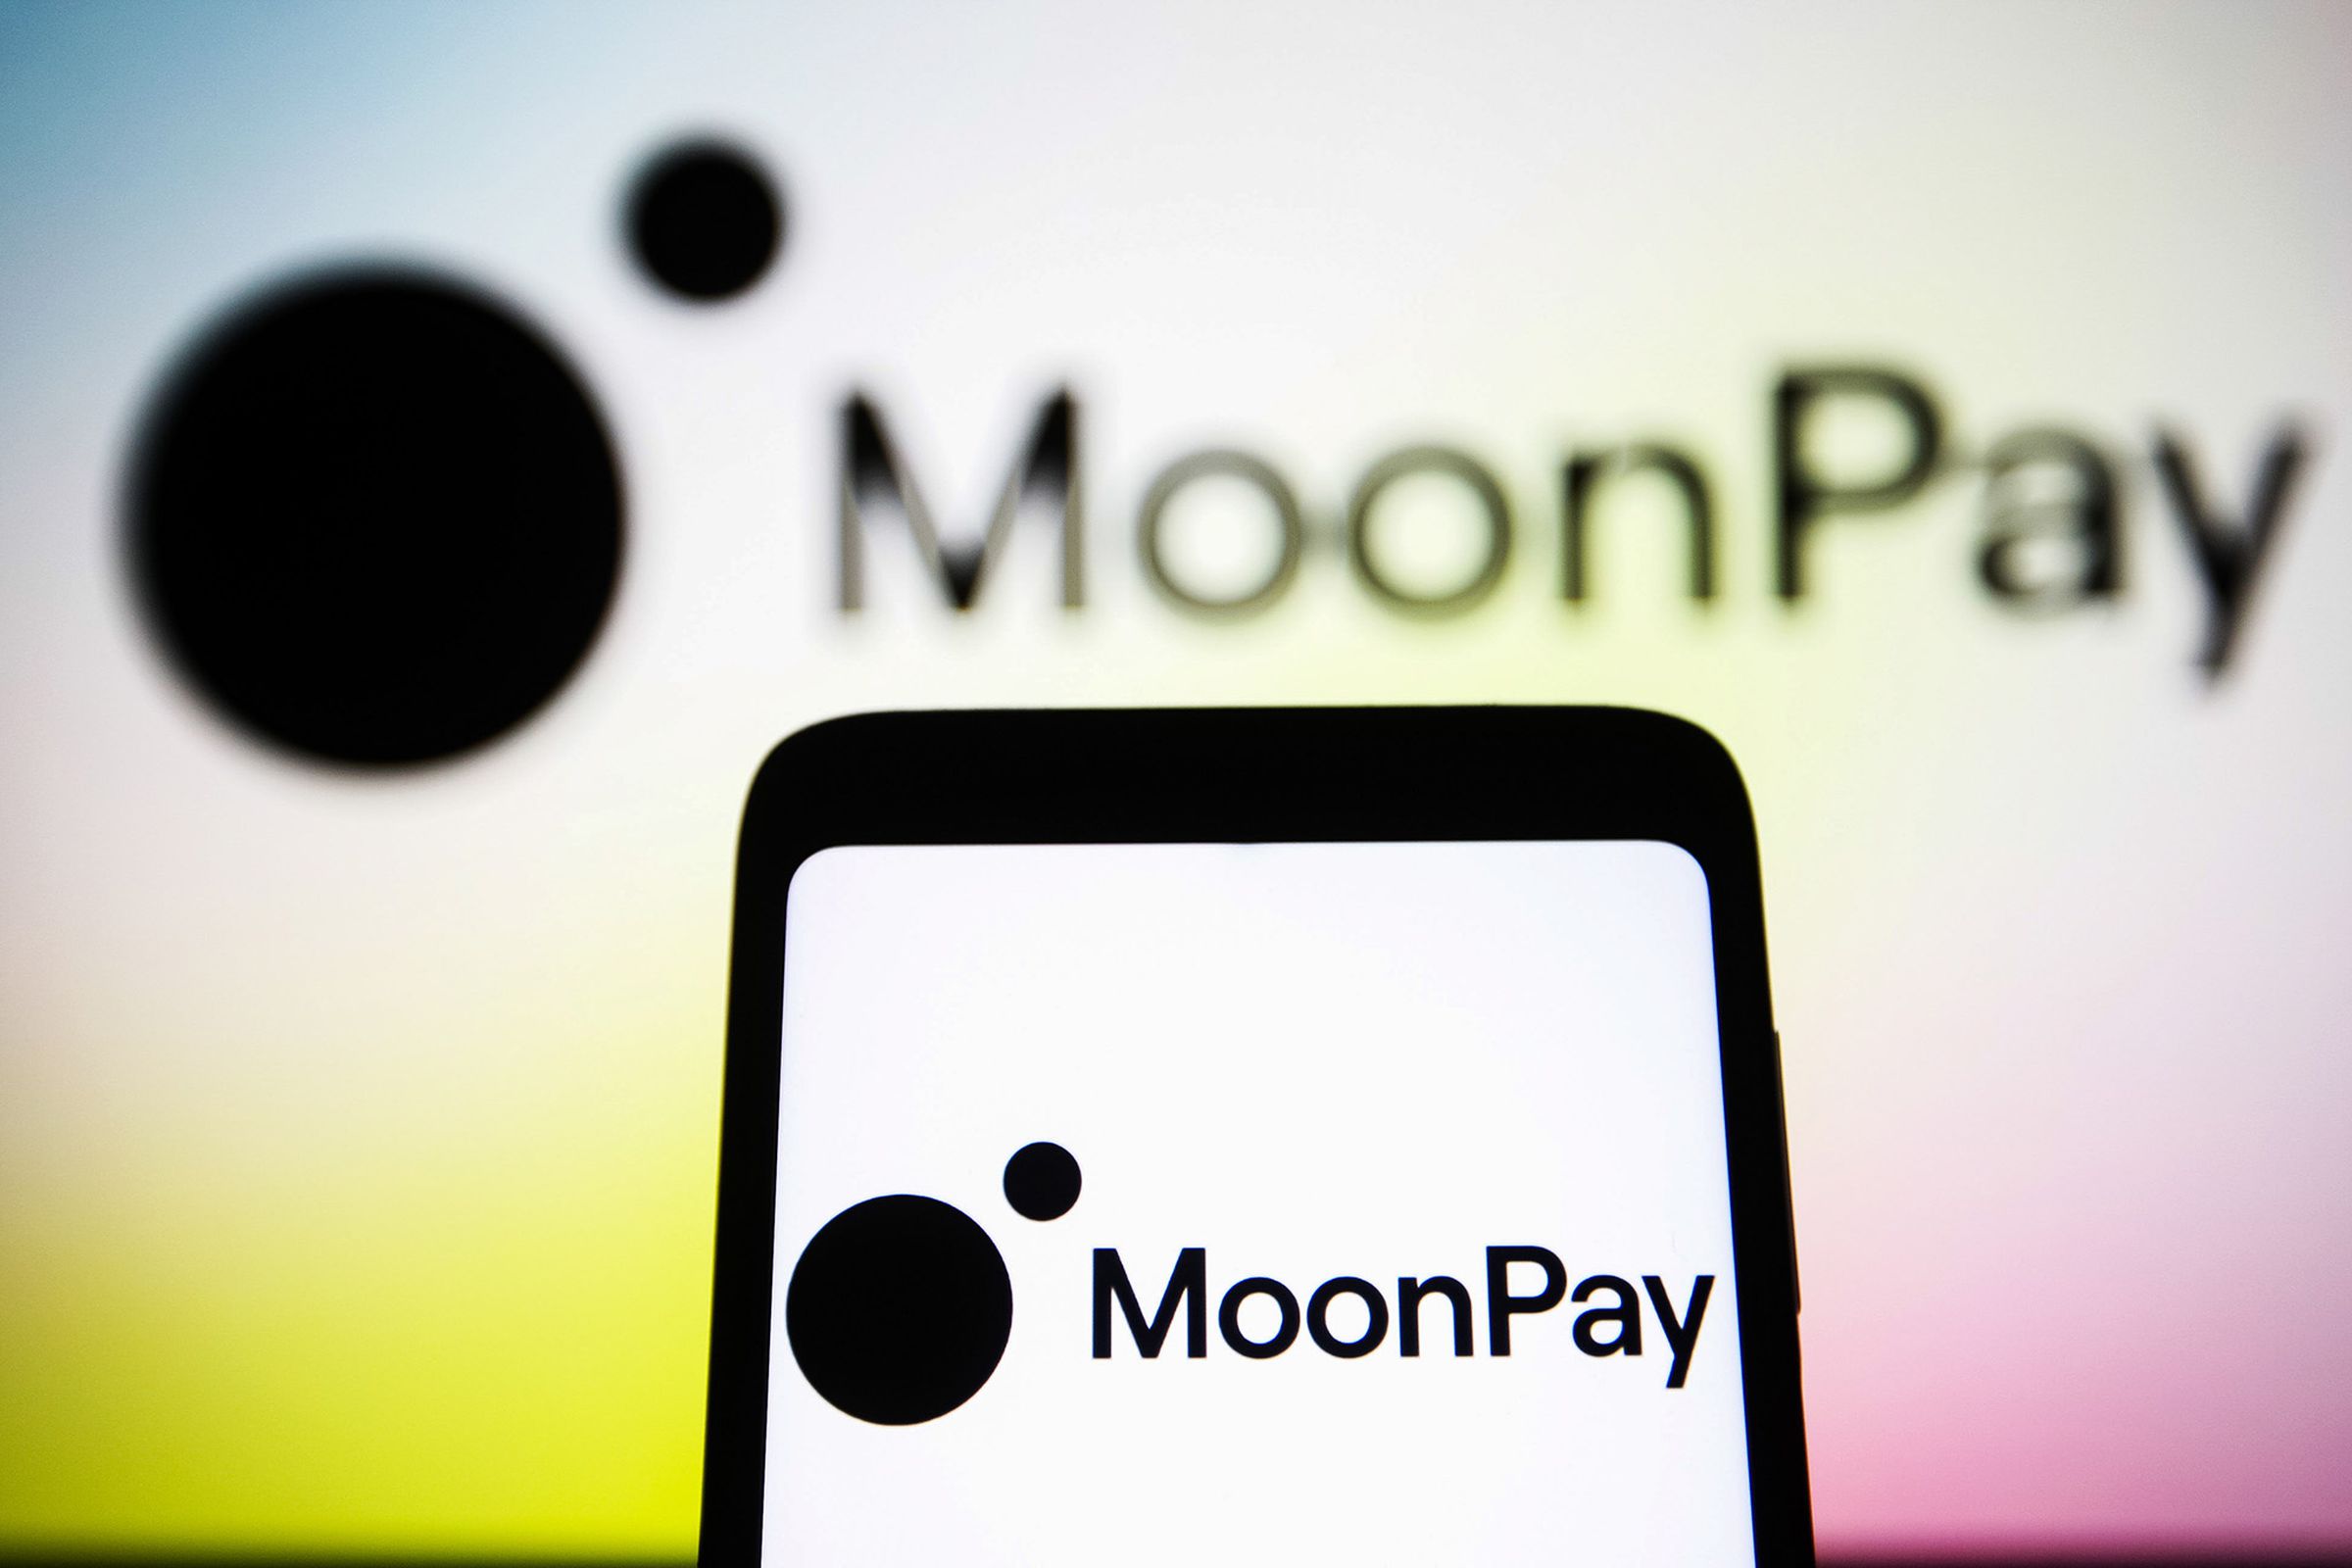 UKRAINE - 2021/11/22: In this photo illustration, the MoonPay logo is seen on a smartphone screen and in the background. (Photo Illustration by Pavlo Gonchar/SOPA Images/LightRocket via Getty Images)